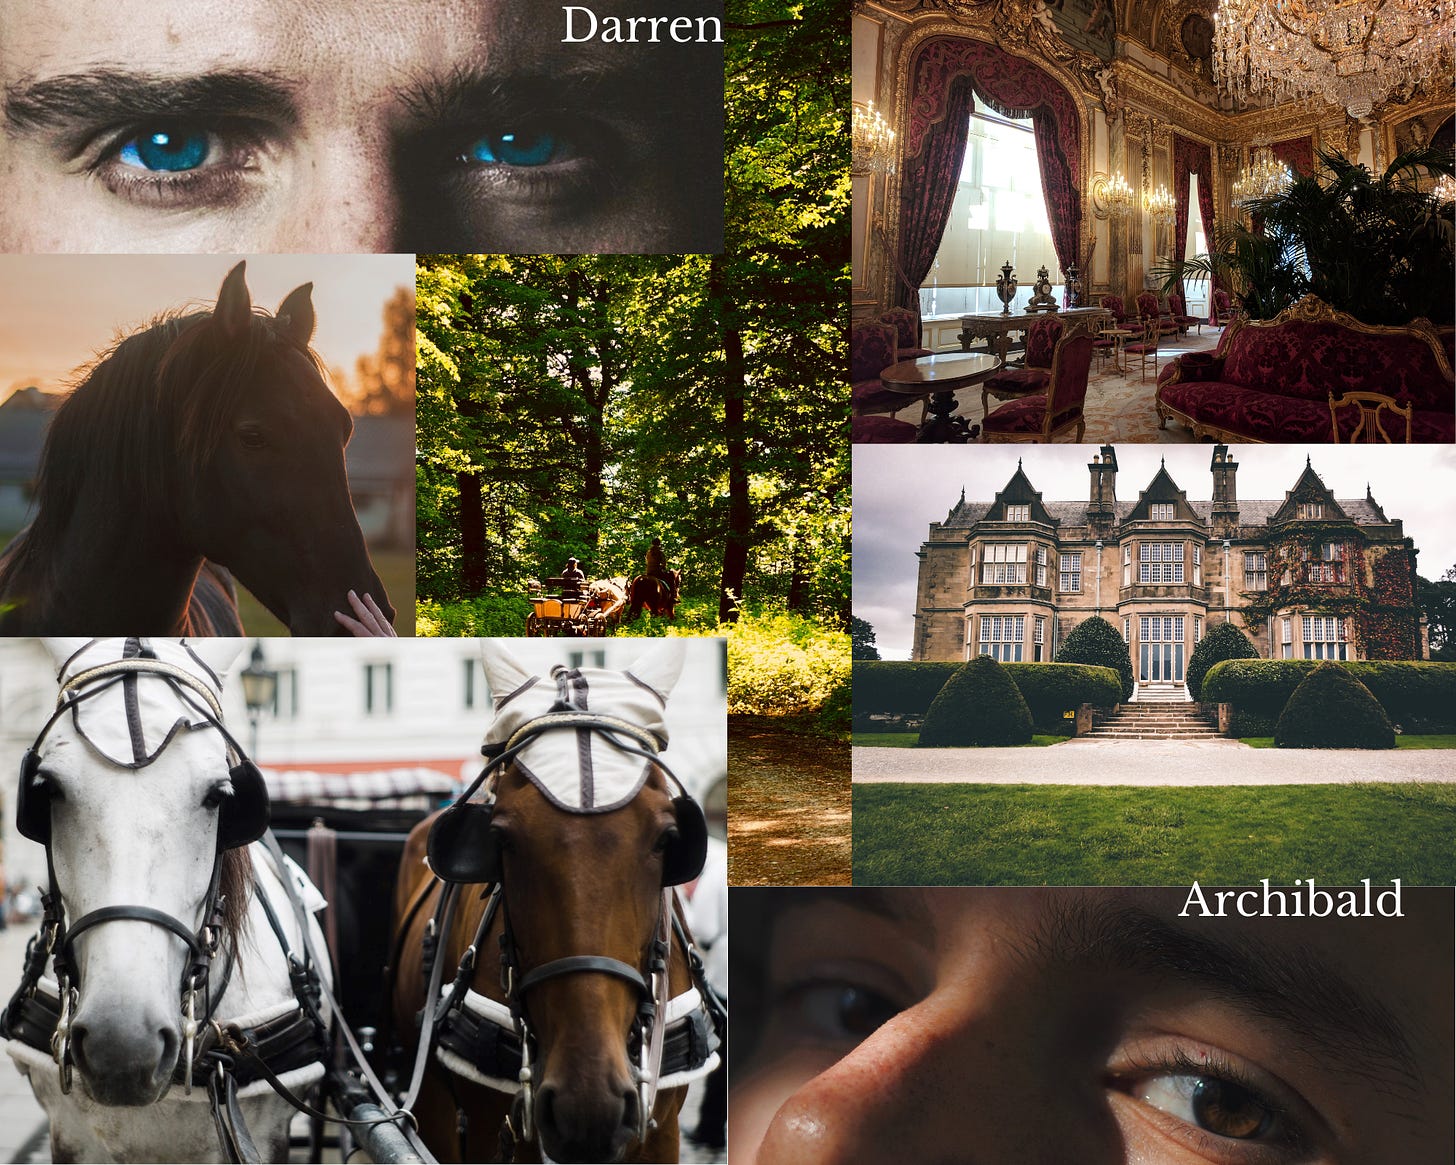 Pic collage, a man's blue eyes caption Darren, a black horse, a carriage in the woods, horses in front of a carriage, a mansion's salon, a mansion, a young man's brown eyes, caption Archibald